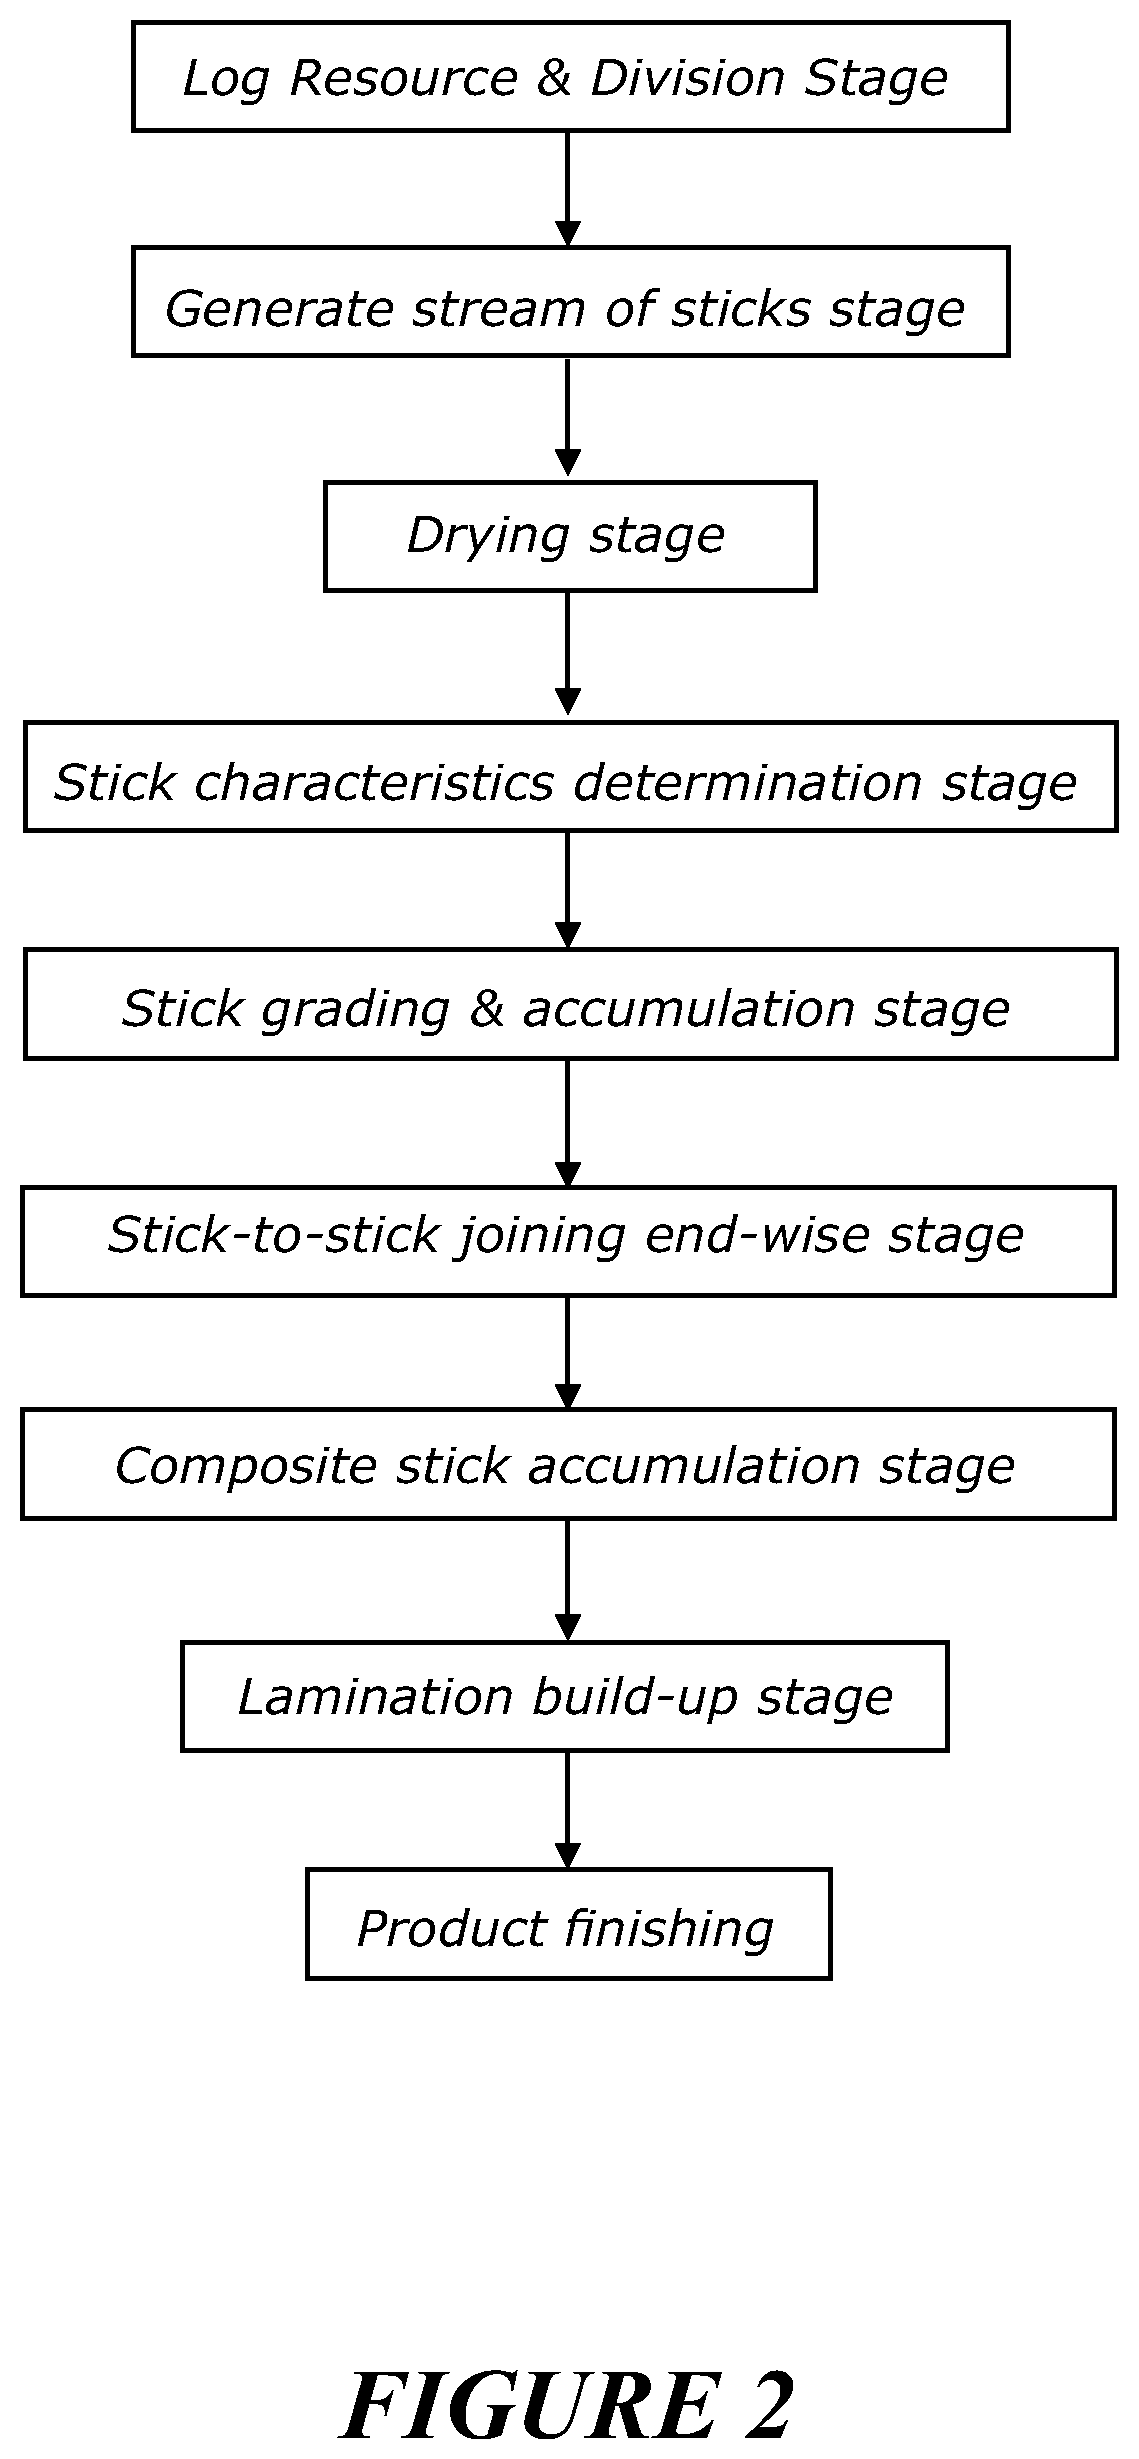 A production process for manufacture of a laminate